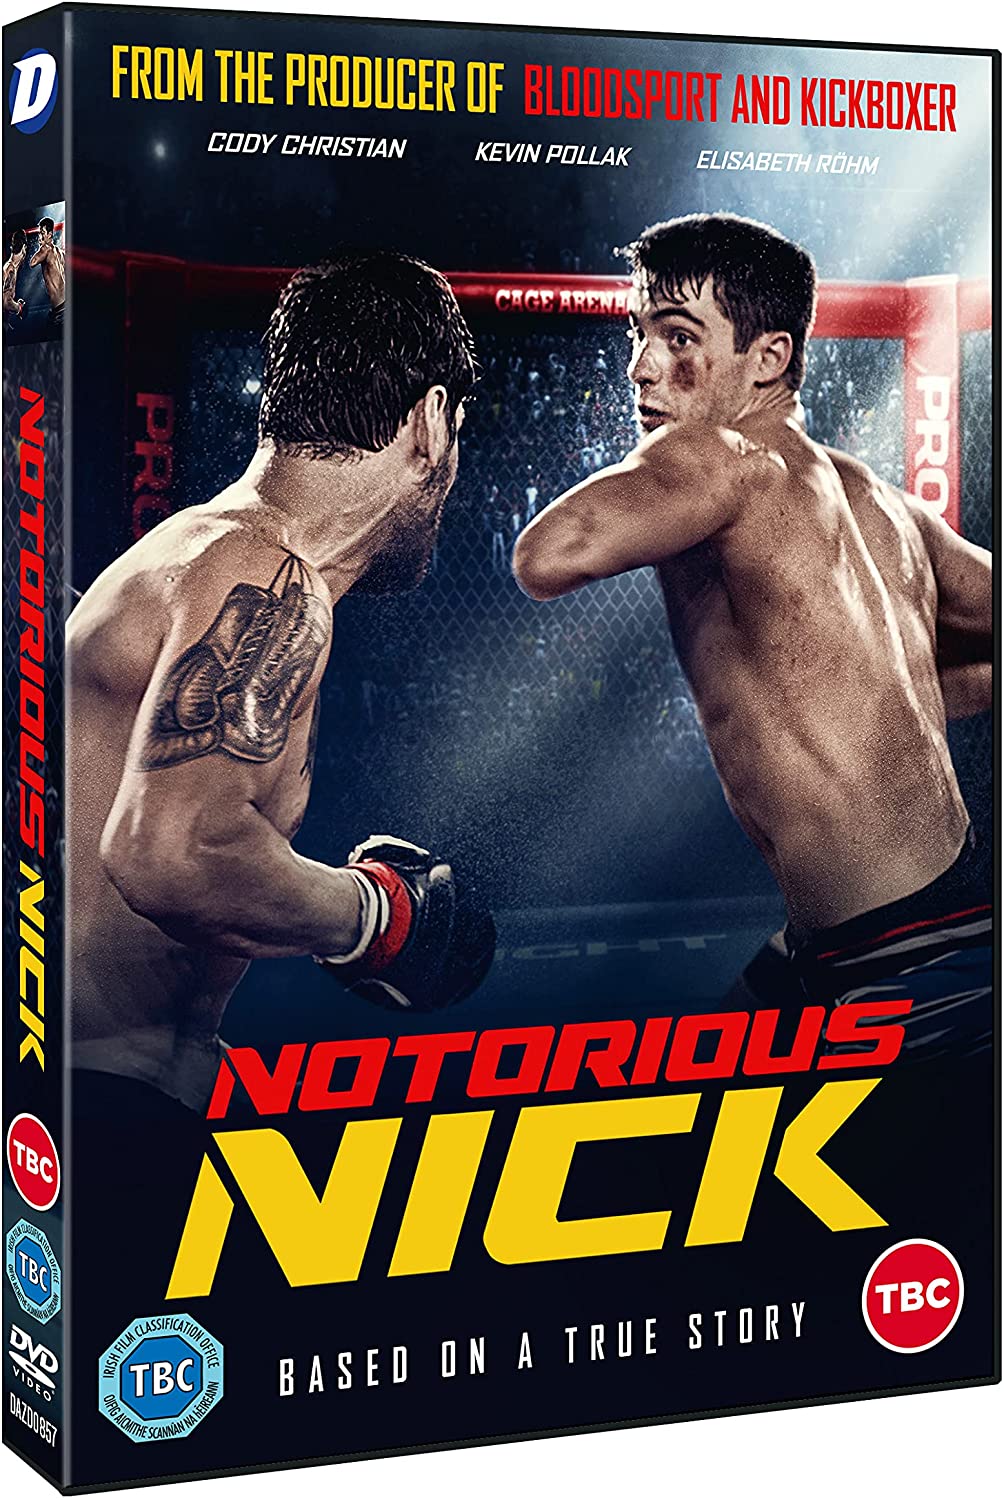 Notorious Nick [2021] - Action [DVD]